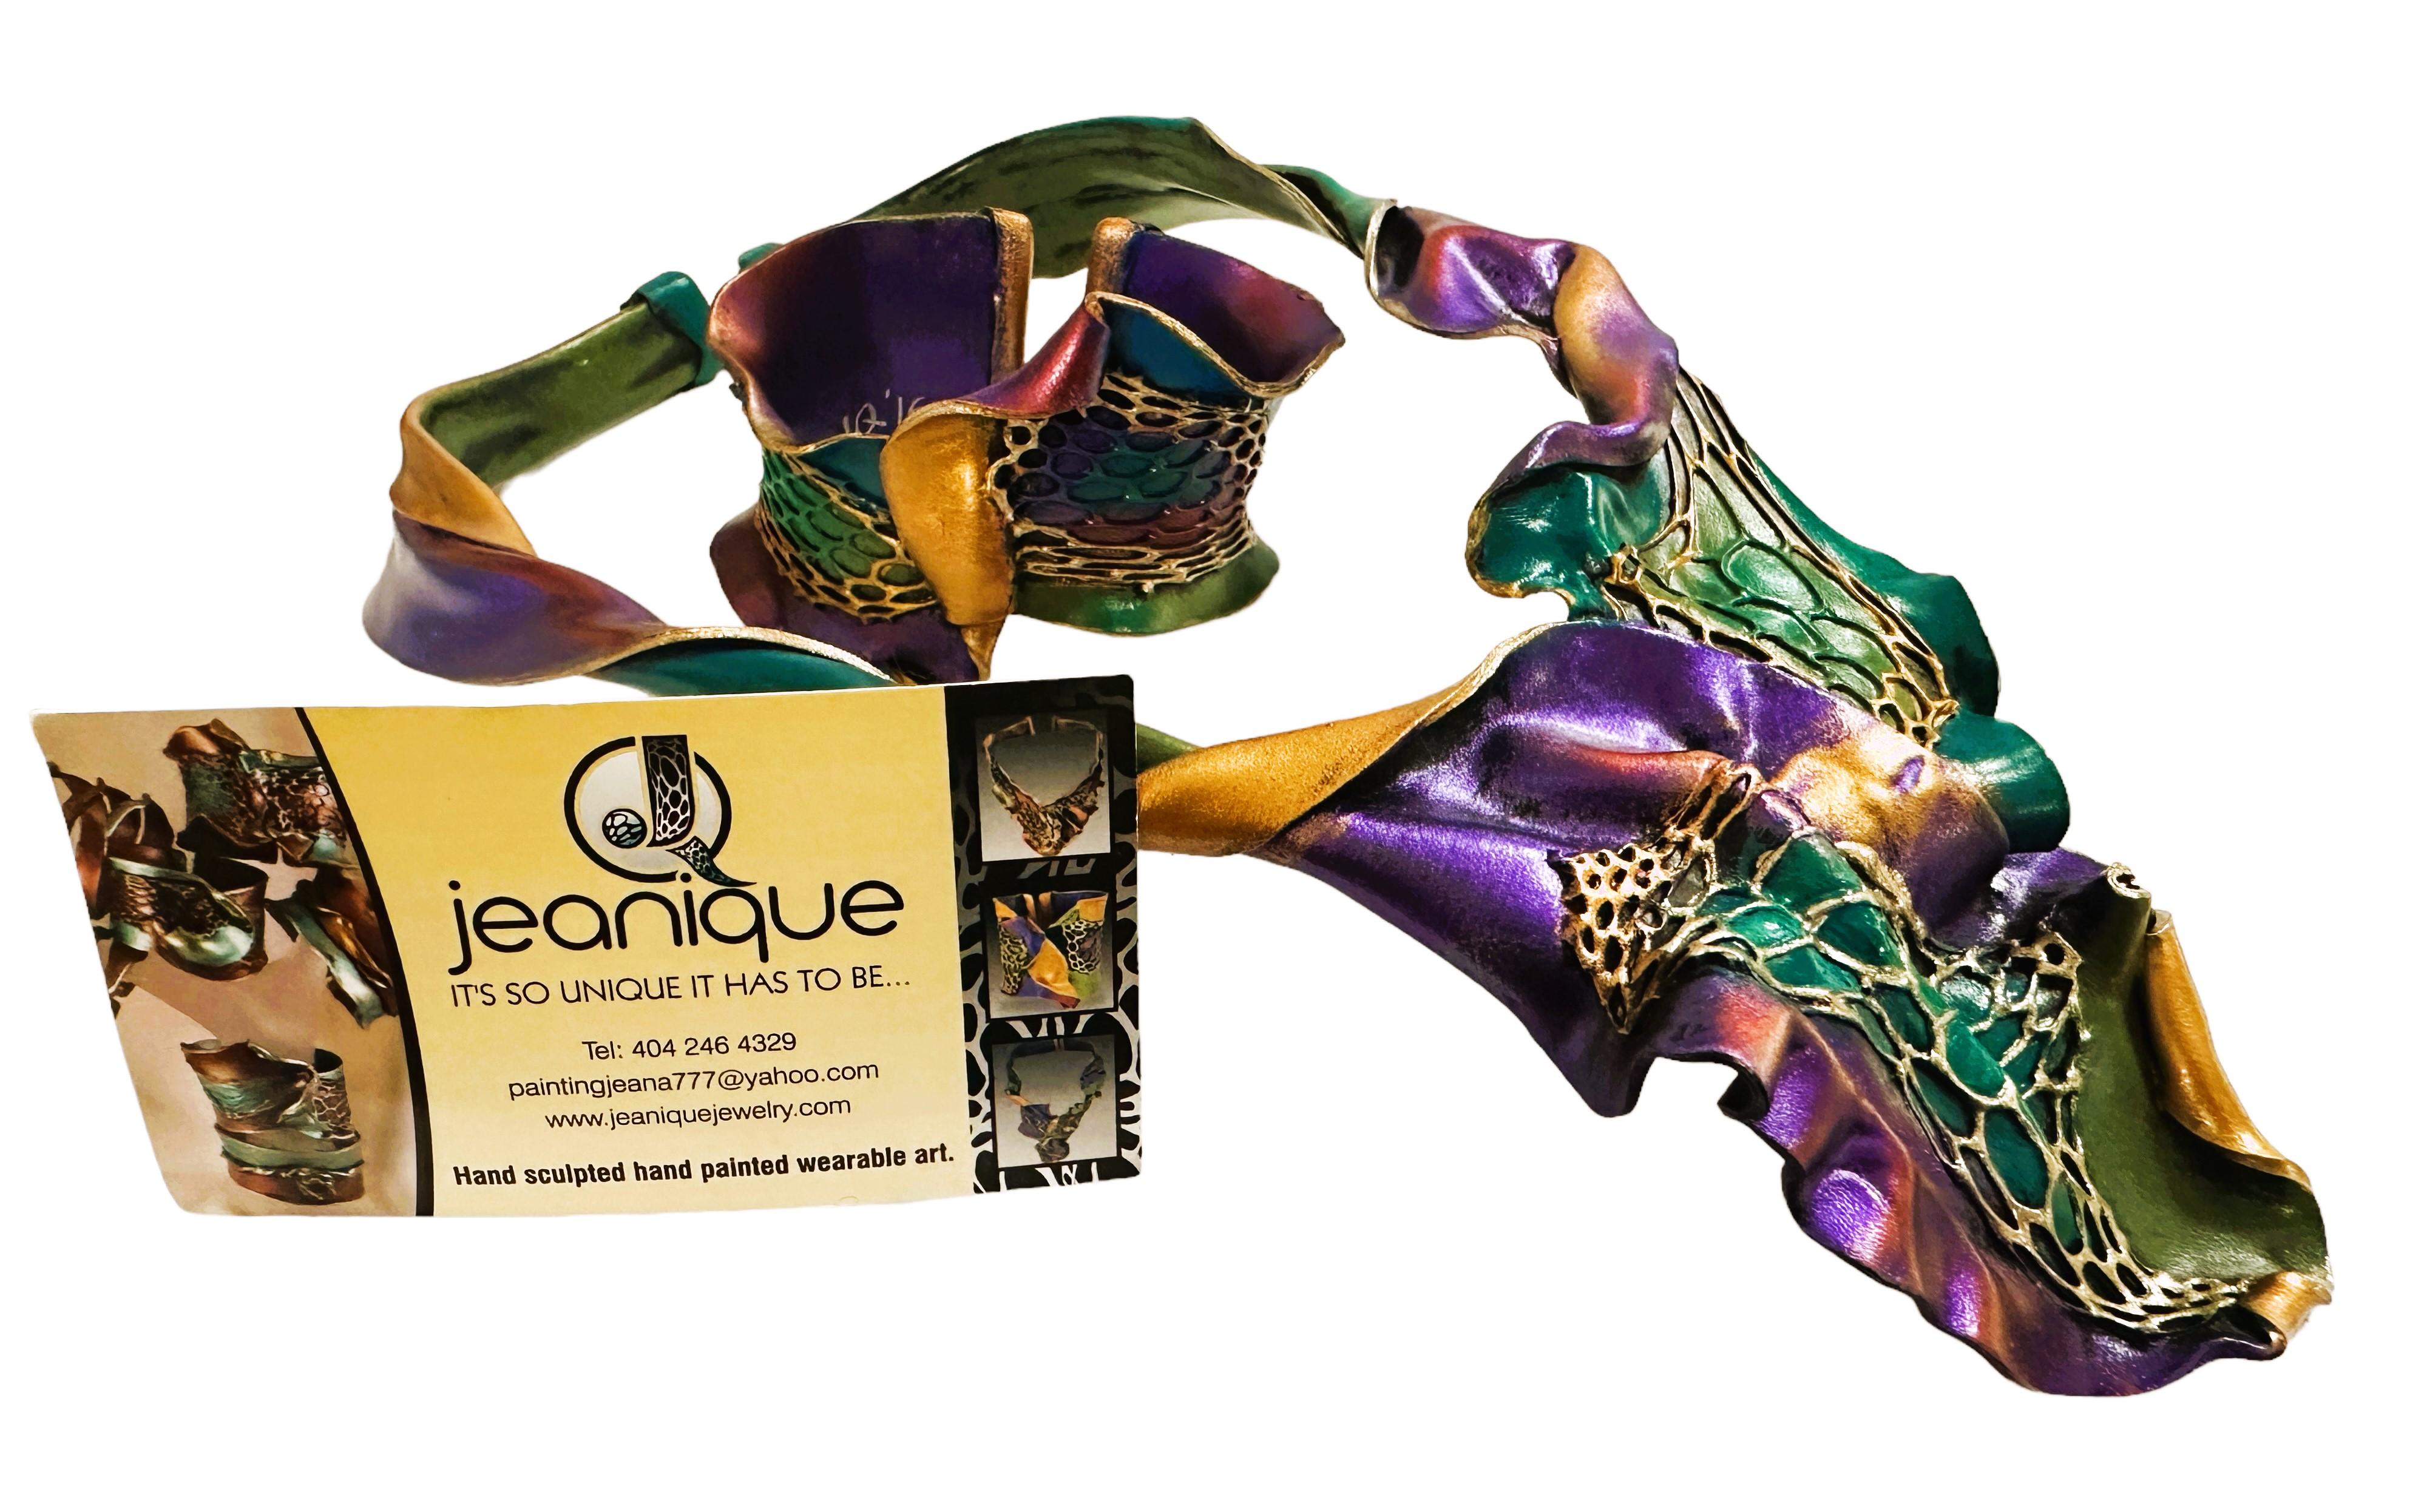 Jeanique Hand Sculpted, Hand Painted Wearable Art - Necklace & Bracelet In Excellent Condition For Sale In Eagan, MN